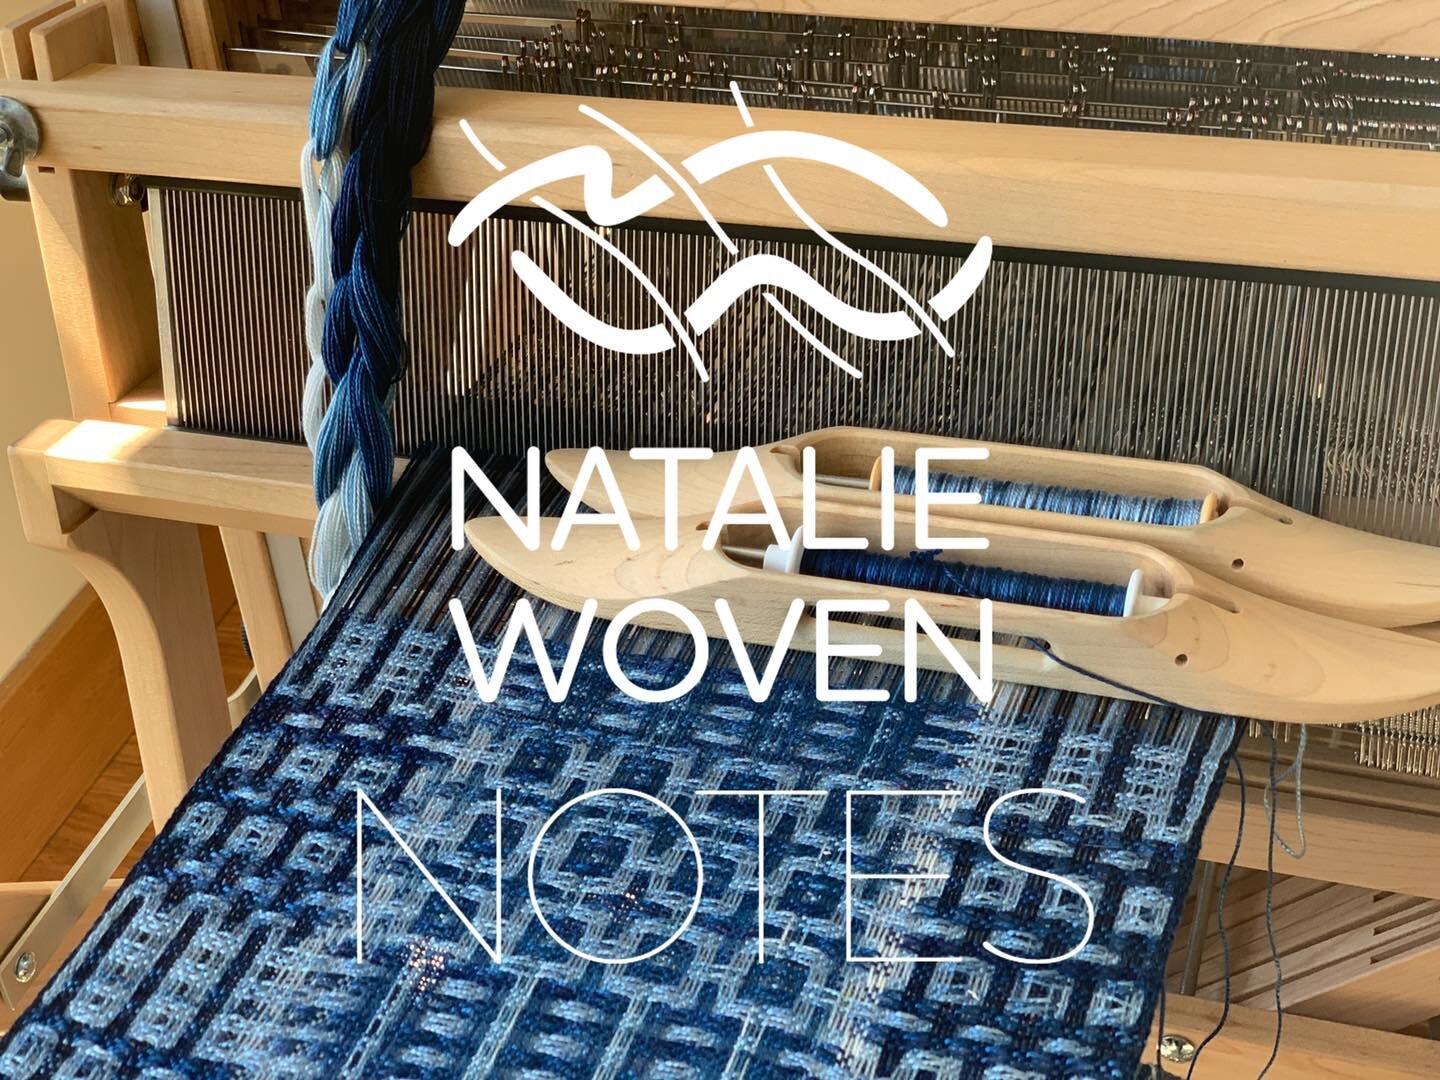 Shades of Indigo NatalieWoven Notes with ice dyeing released in my shop! Link in bio! #nataliewoven #nataliewovennotes #deflecteddoubleweave #weaversofinstagram #weaversofig #handweaversofinstagram #handweavers #indigoweaving #icedyeing #icedye #iced